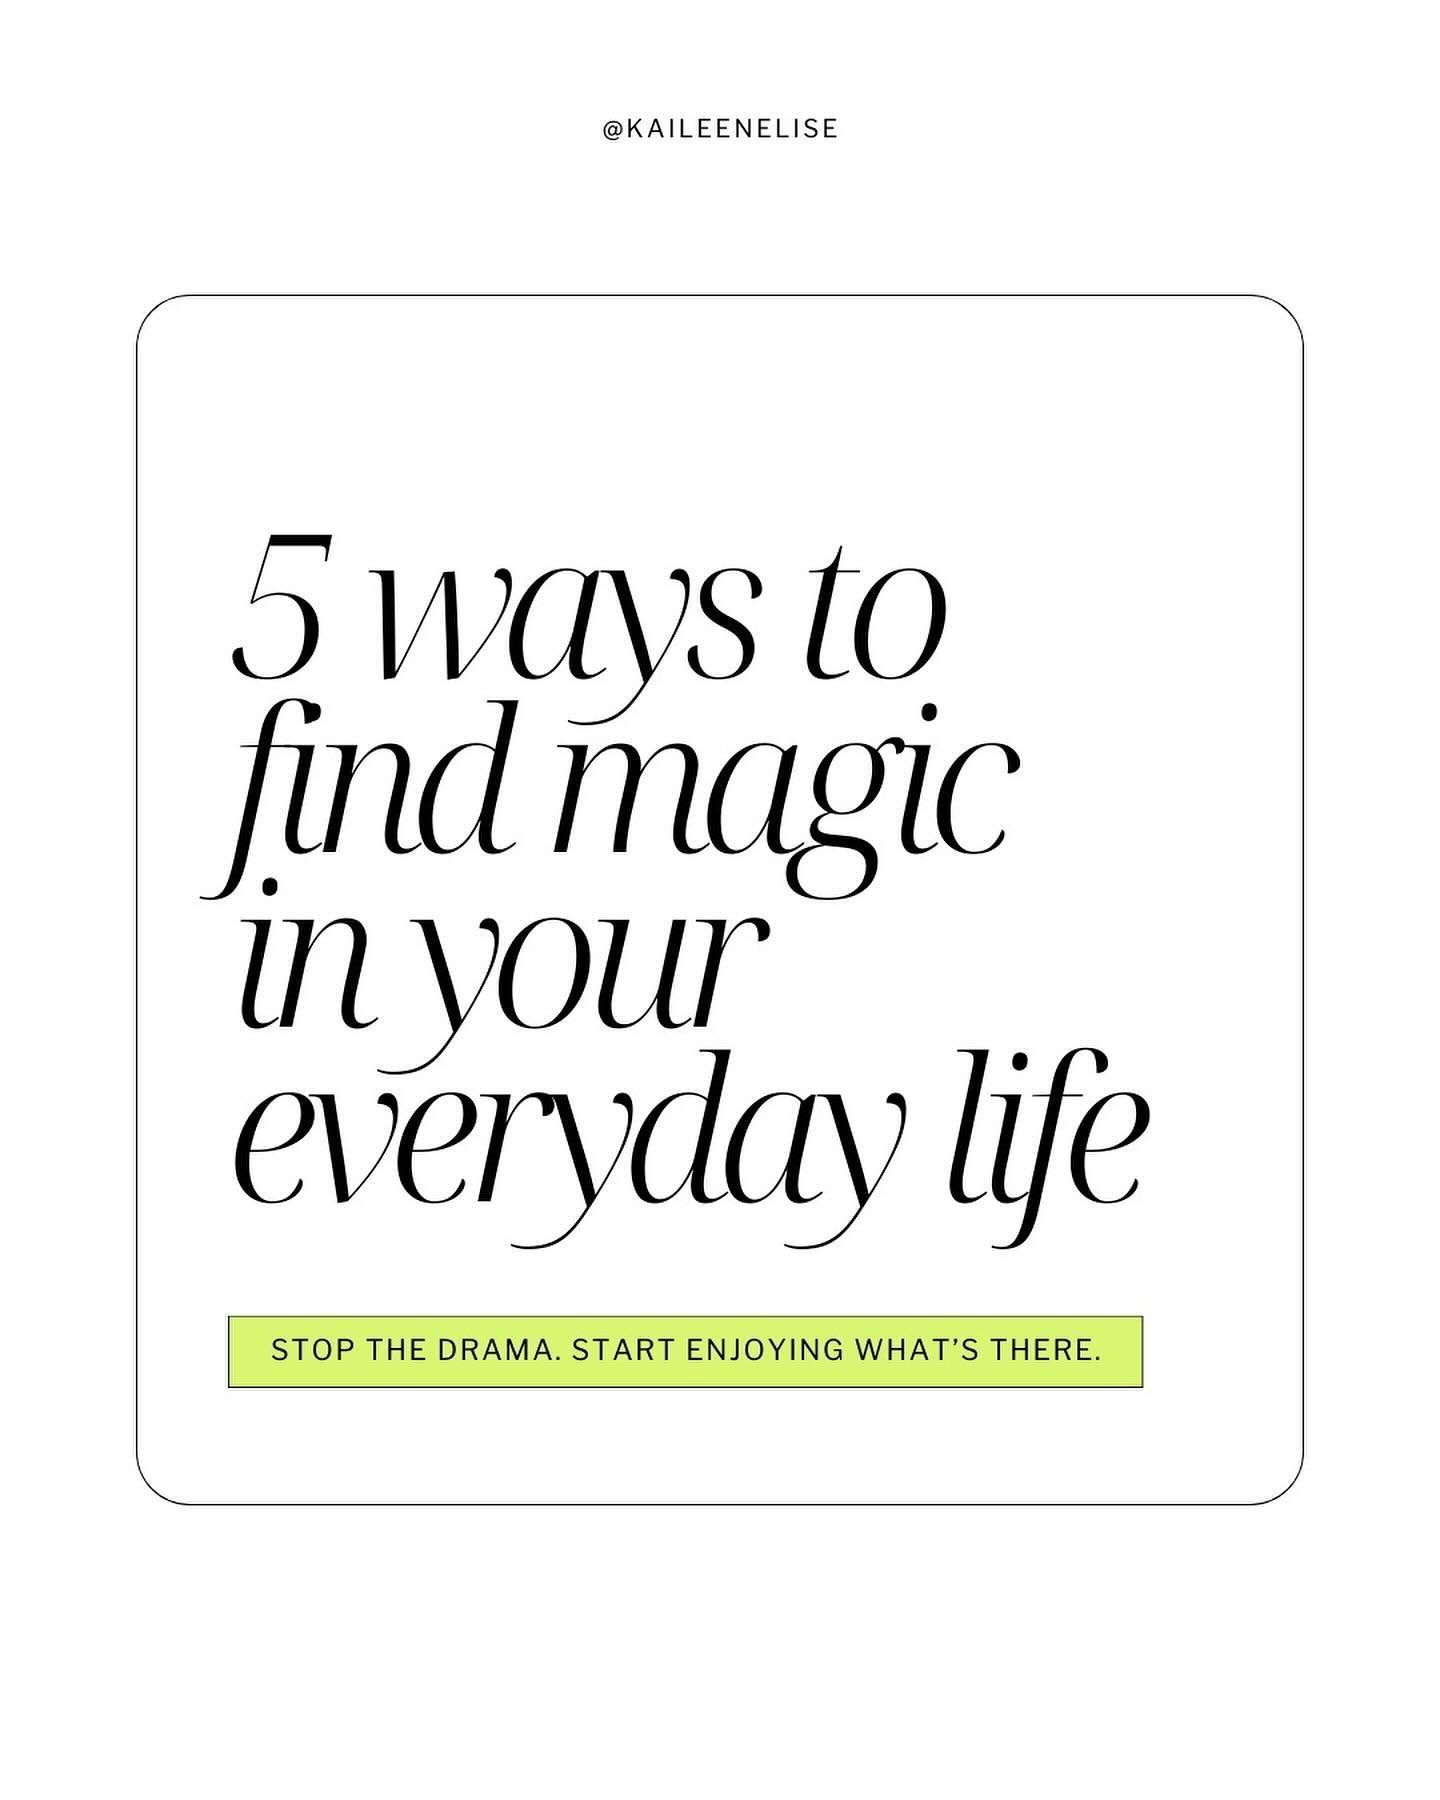 Save this gem! 💎 

Then swipe for 5 simple, easy ways to find magic in your days.

Be sure to catch those journal prompts, too. They&rsquo;ll help you tune in and find the magic all around you.